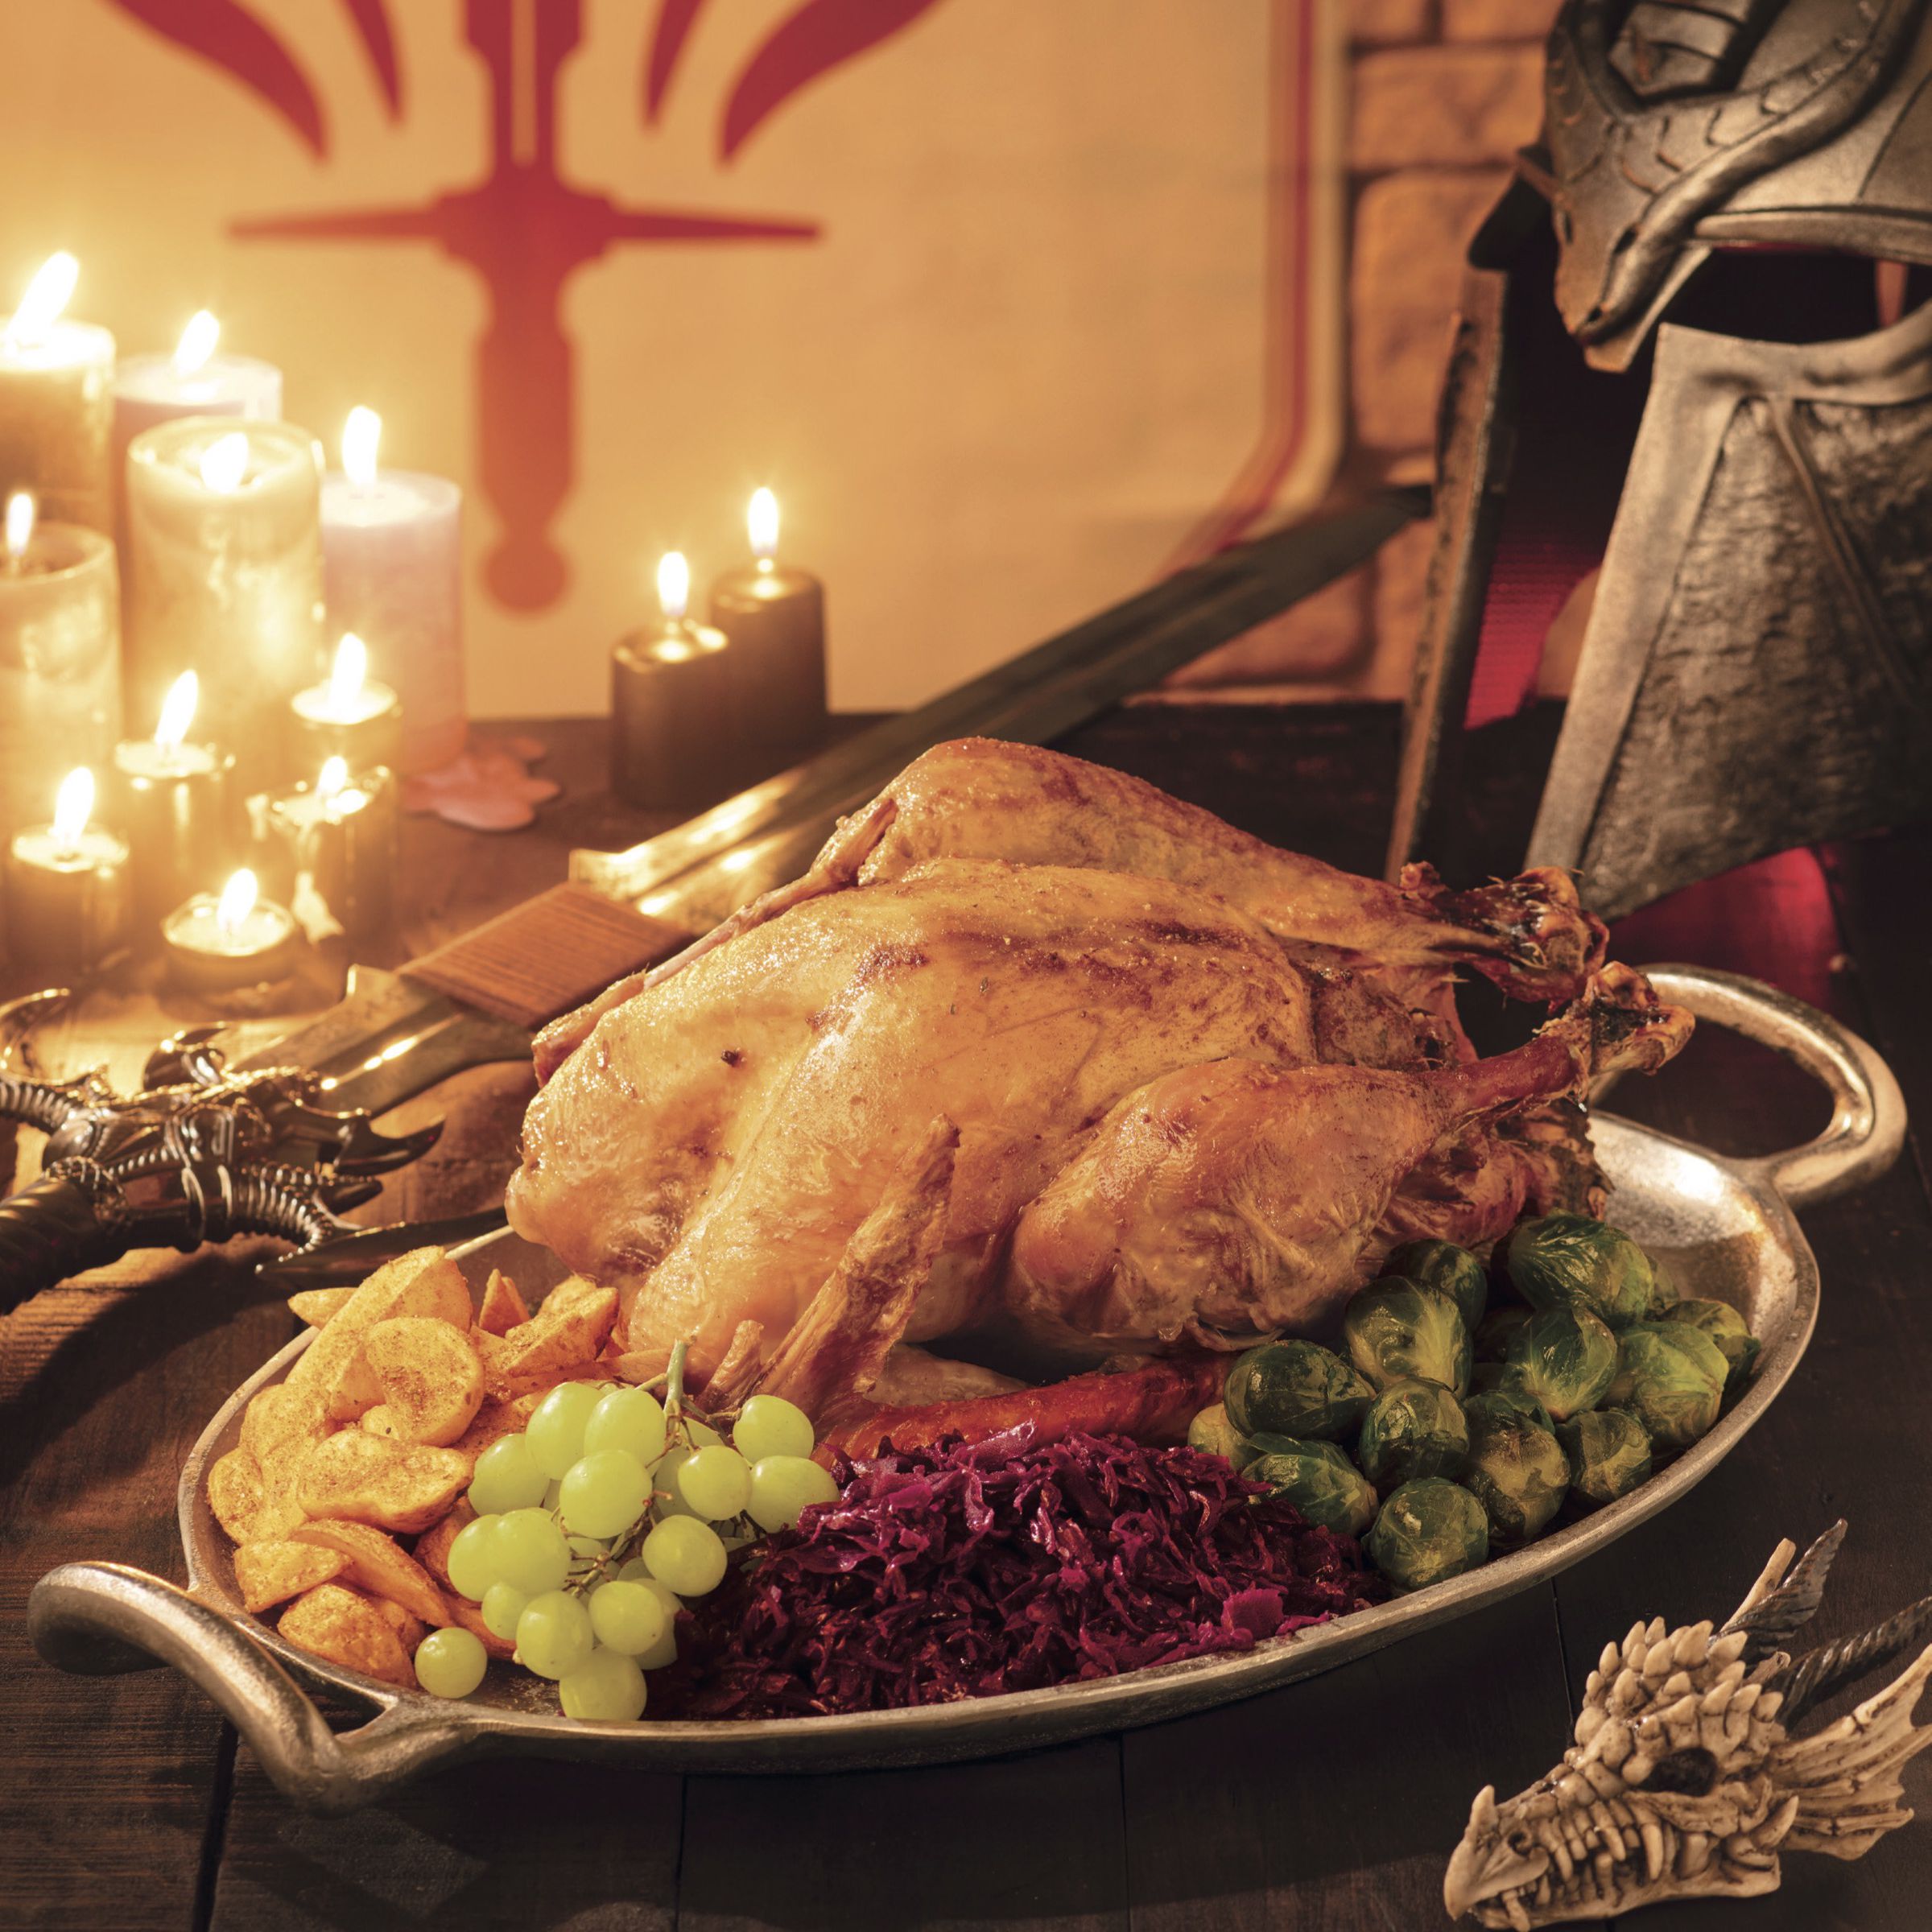 A roast turkey dinner in front of a helmet, sword, and banner representing Dragon Age’s templar order.